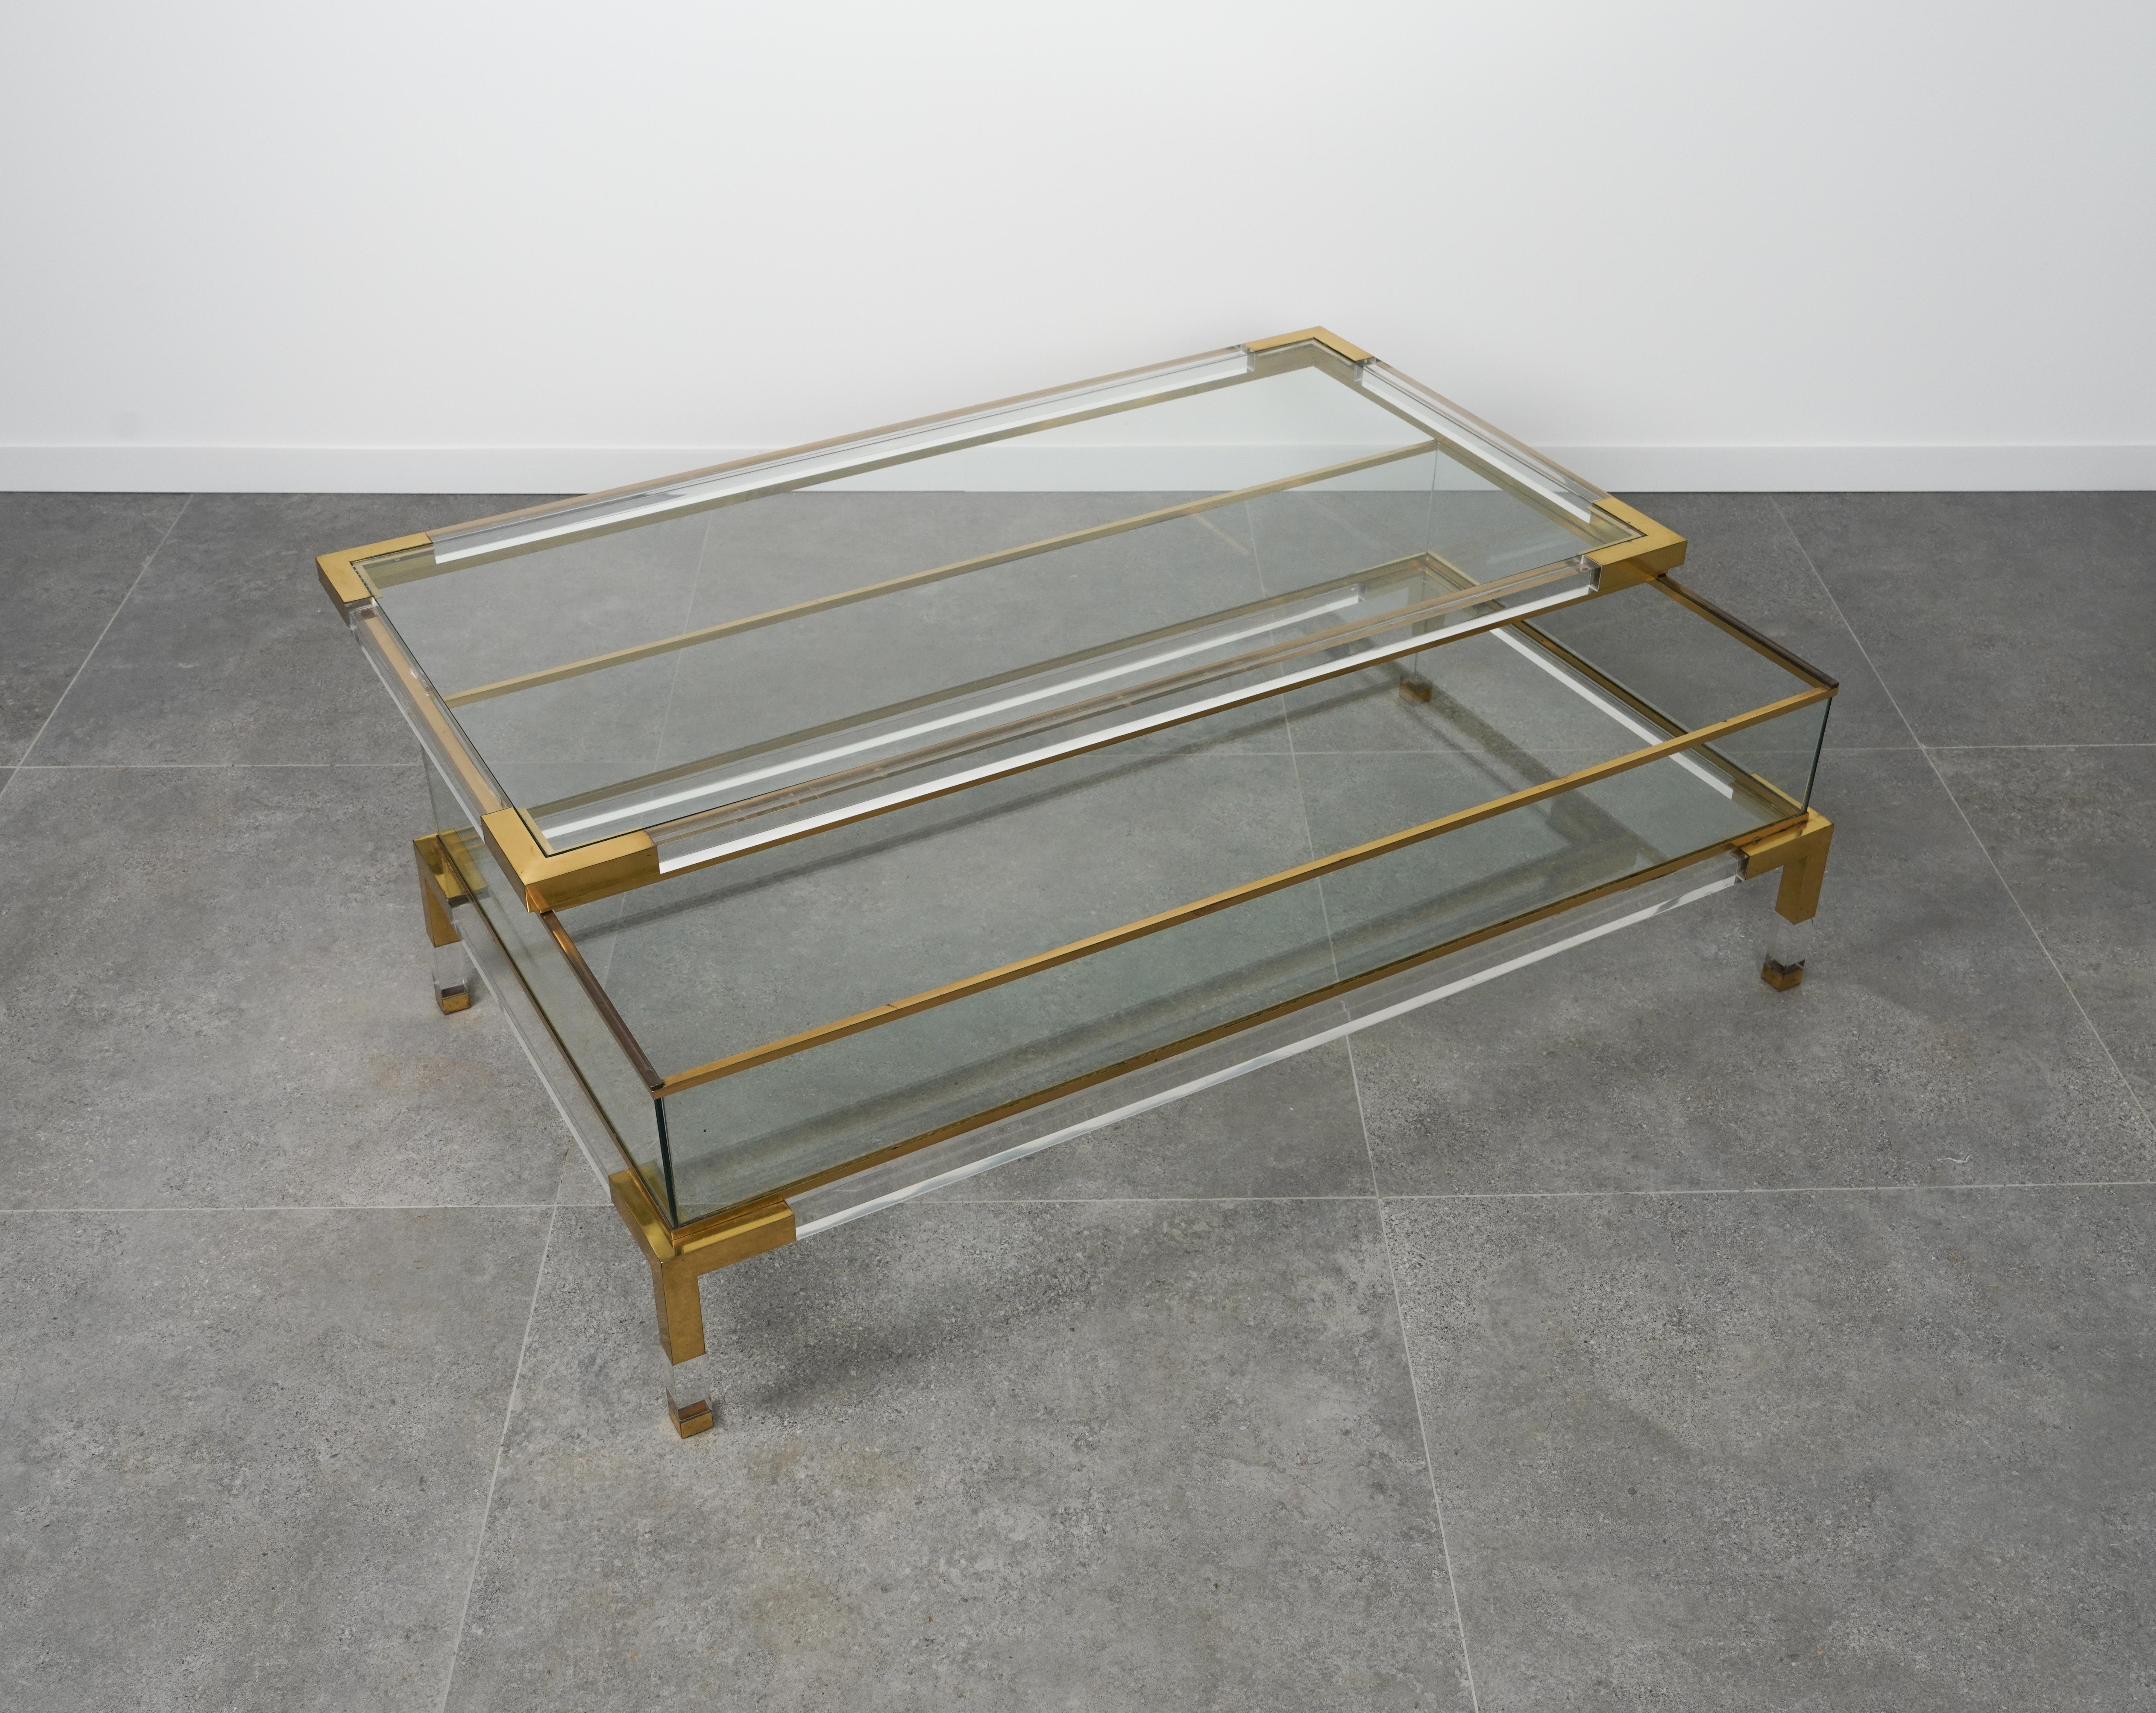 Late 20th Century Midcentury Coffee Table in Lucite, Brass & Glass by Maison Jansen, France 1970s For Sale